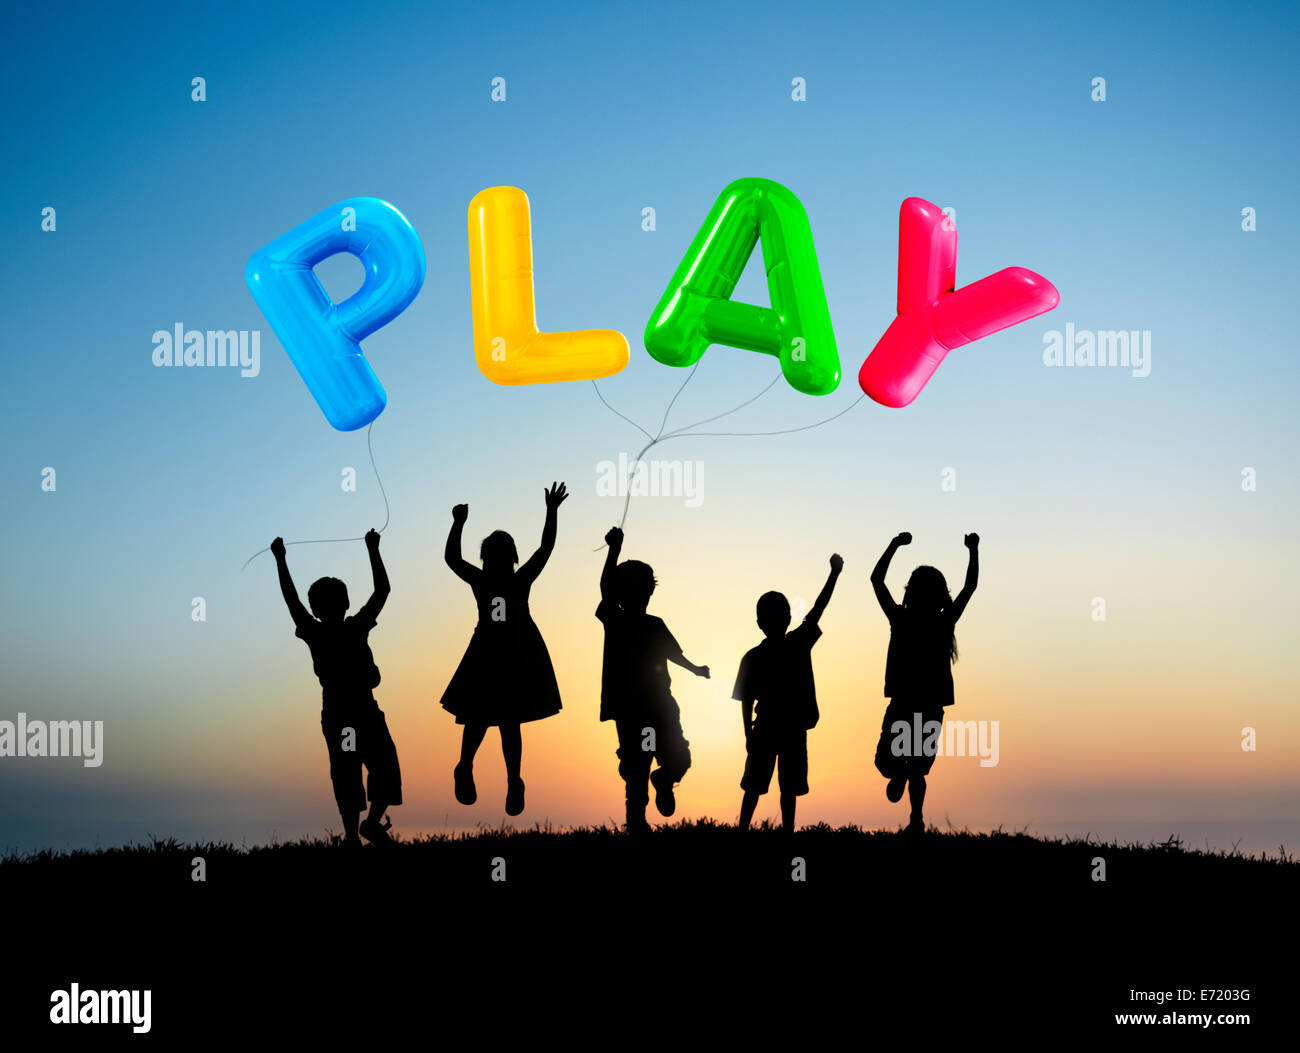 Silhouette of Children Playing Balloons Outdoors Stock Photo